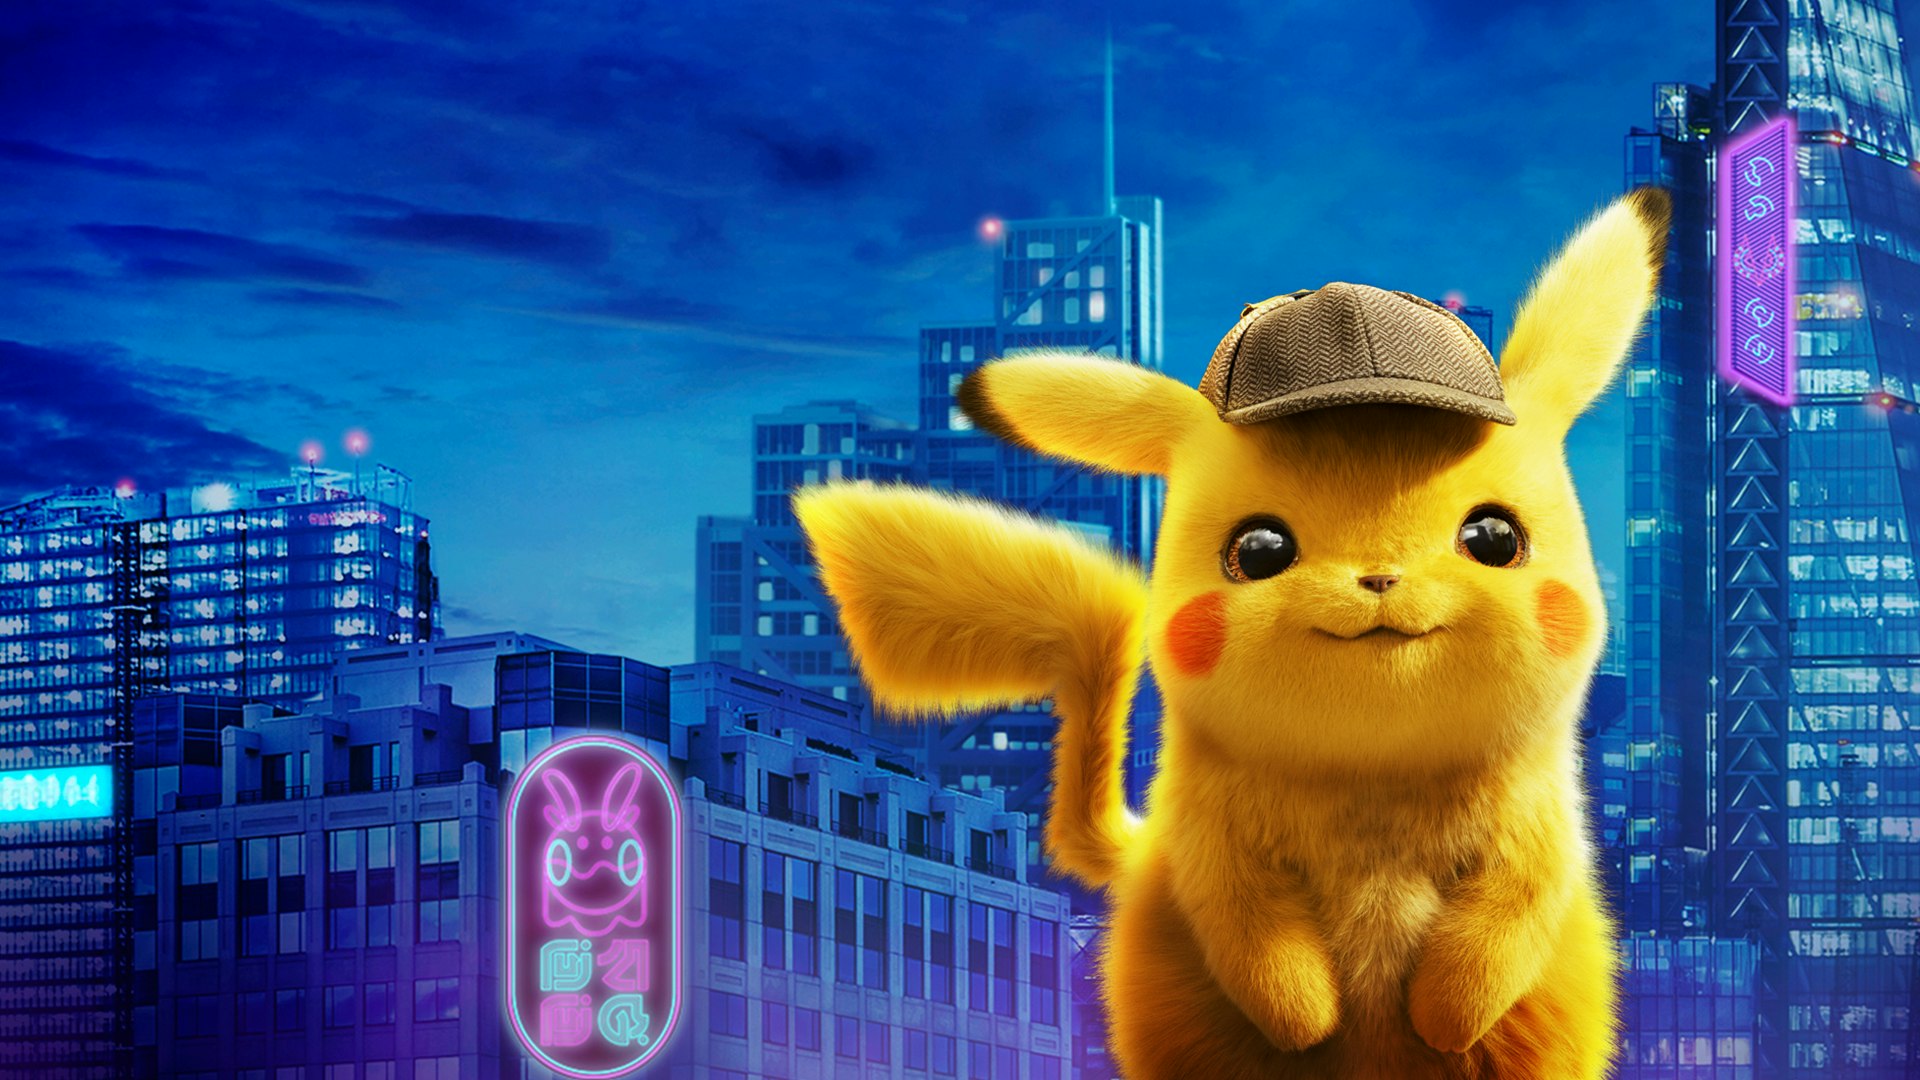 Pokemon detective pikachu 480p full movie in hindi download leaked by